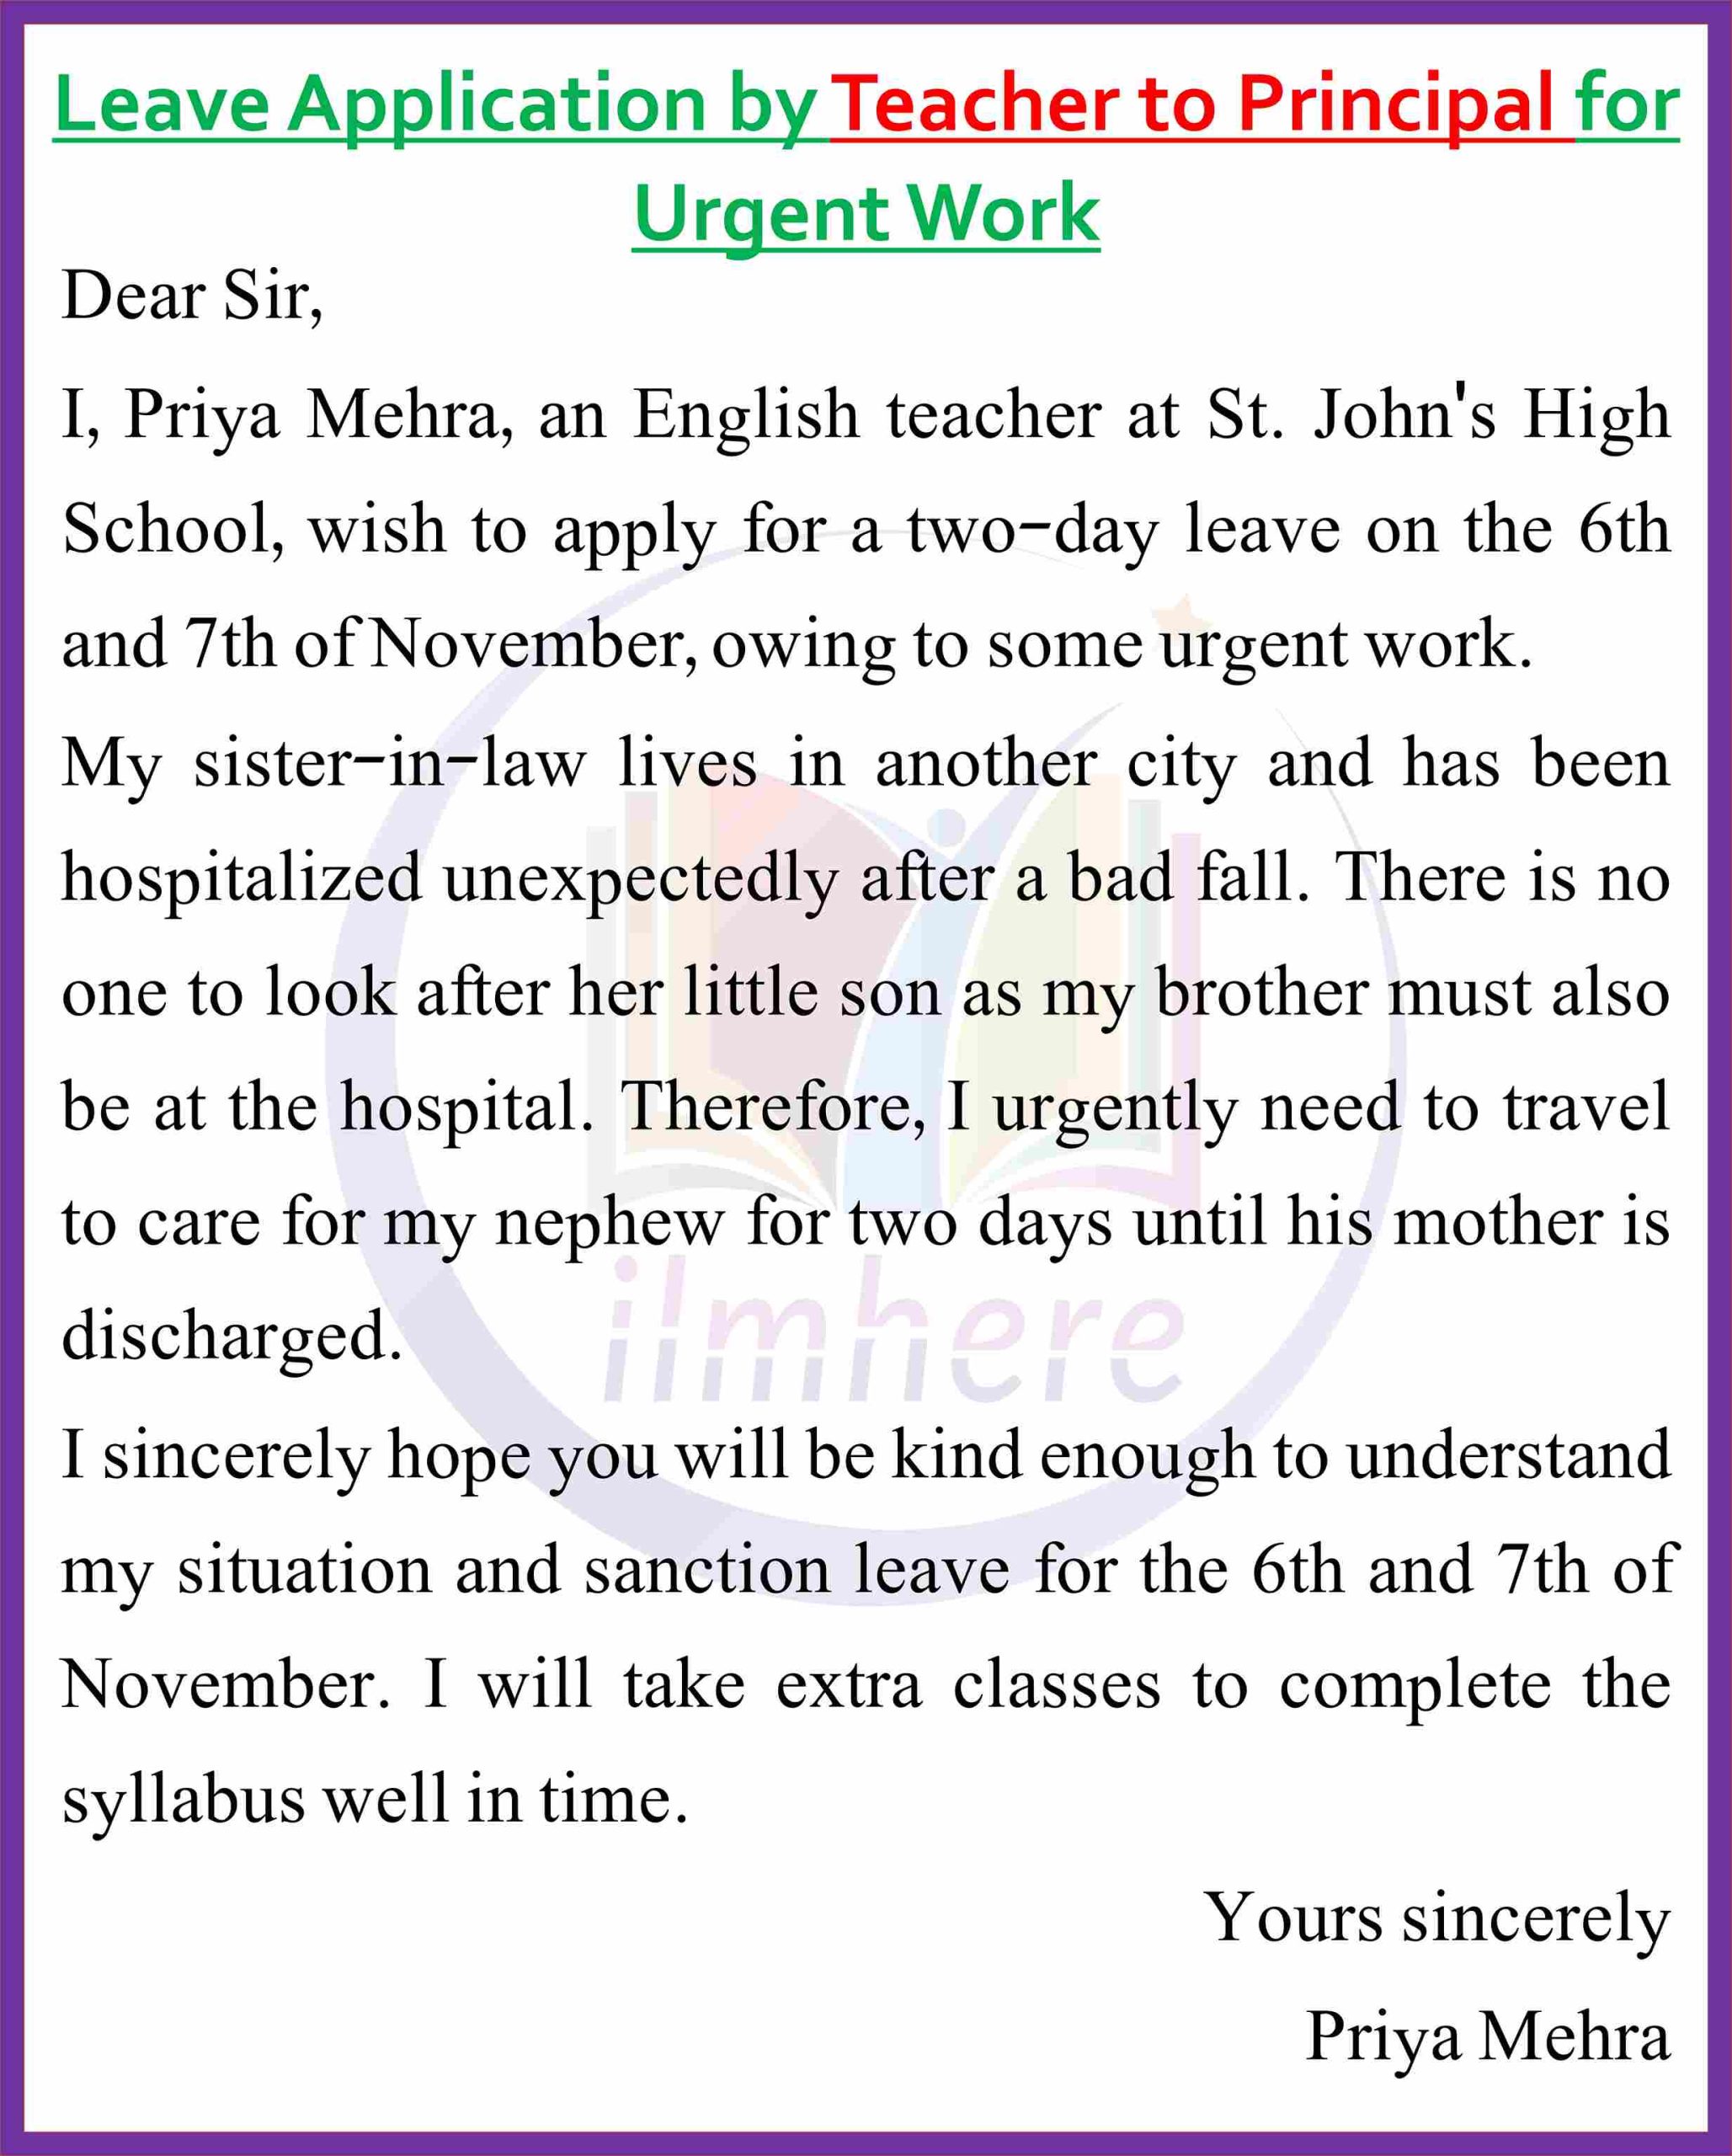 Leave Application by Teacher to Principal for Urgent Work